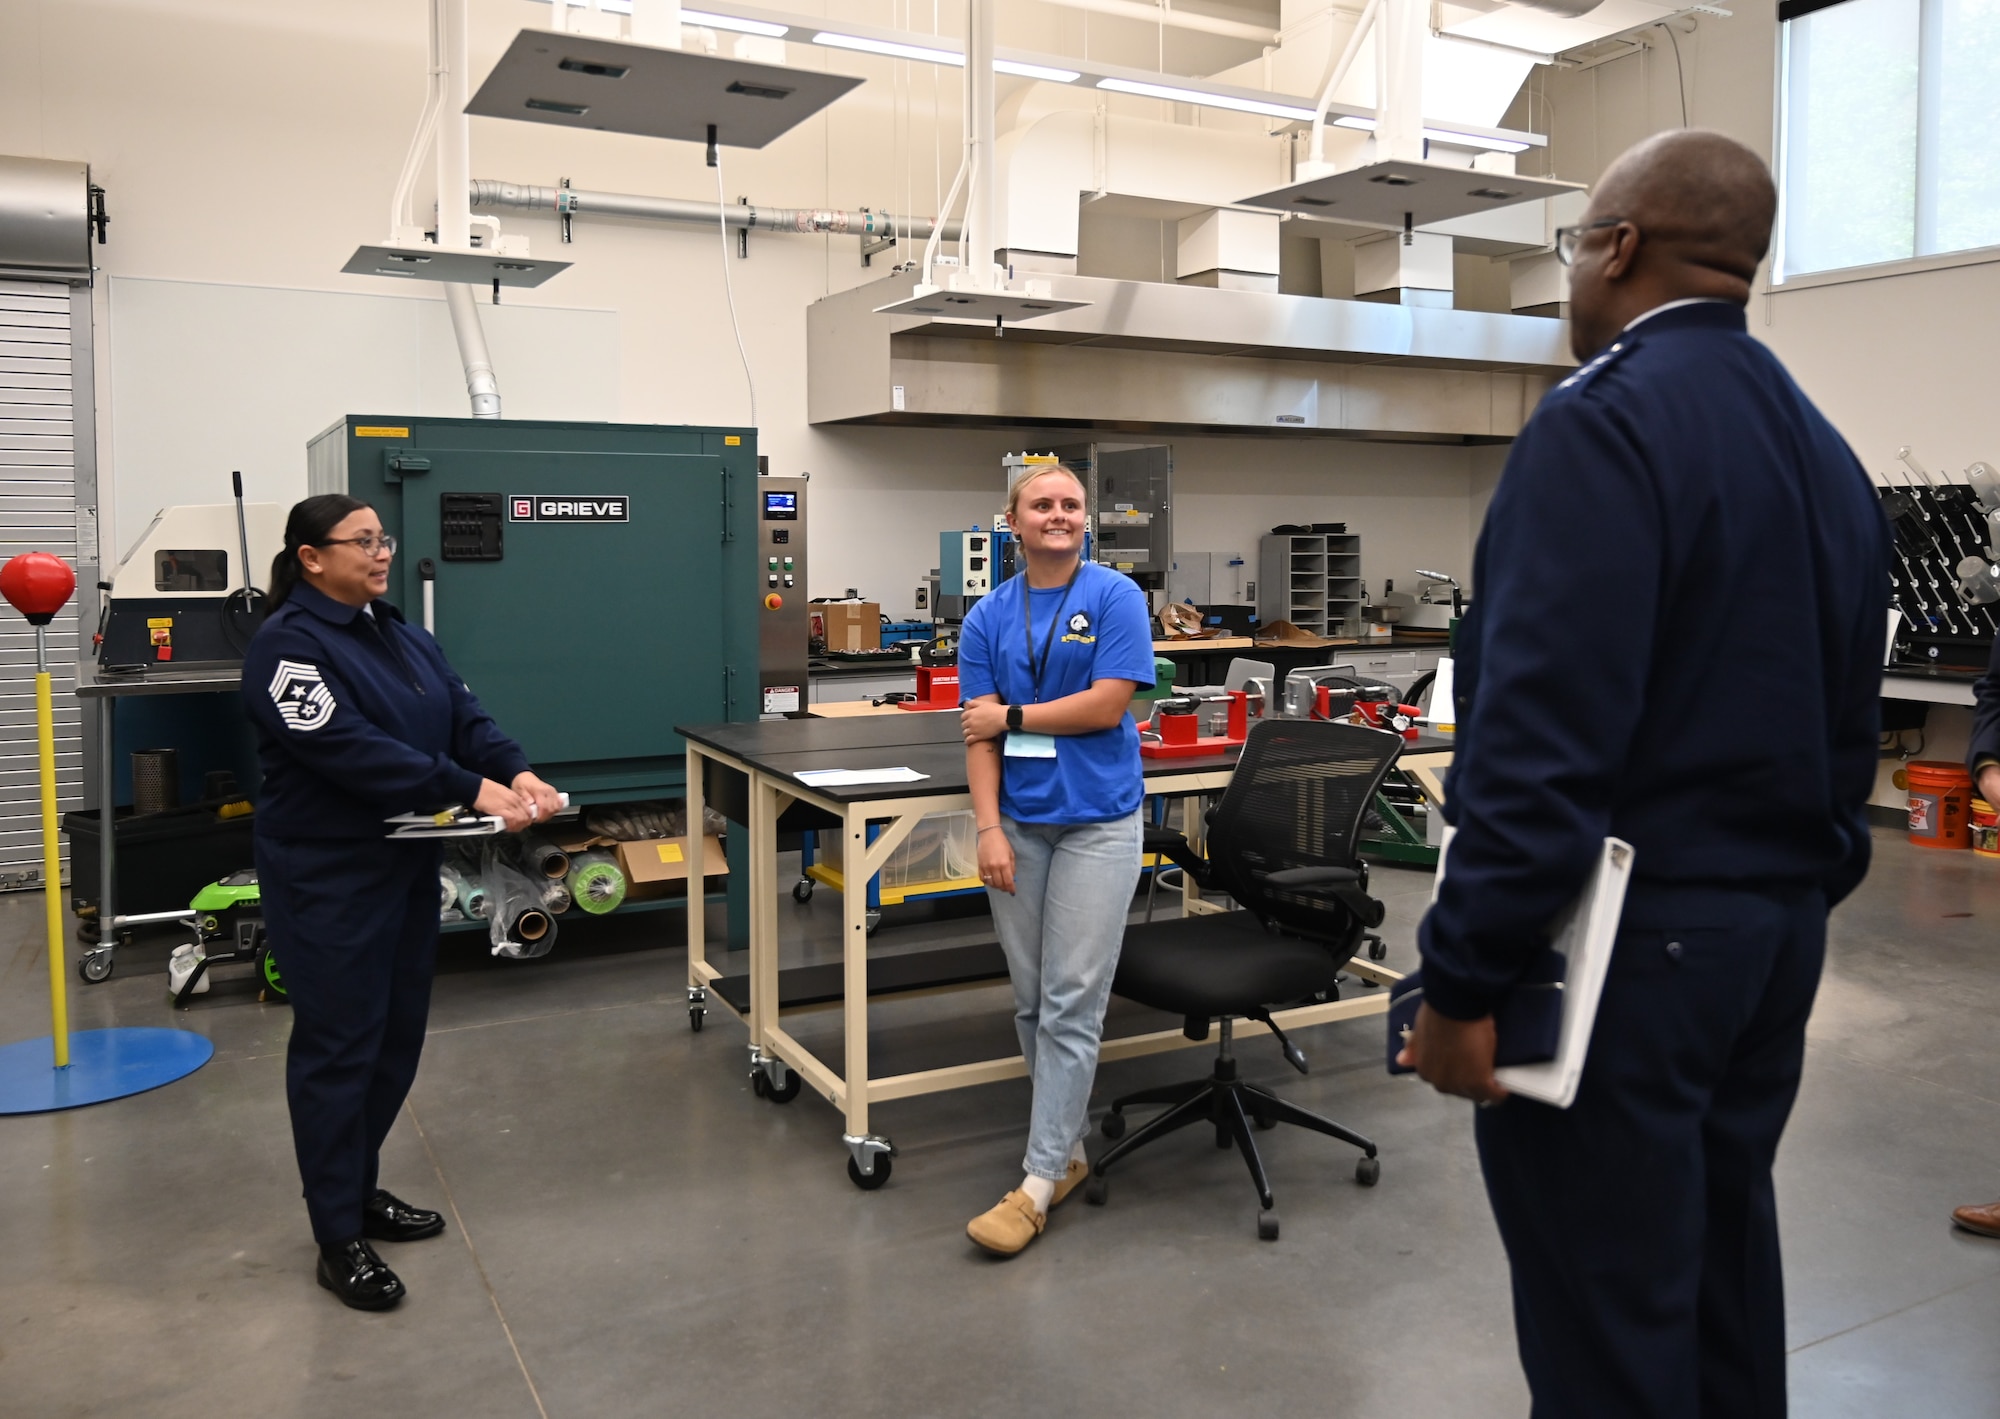 Two Air Force members speak to an Angelo State University student in a lab setting